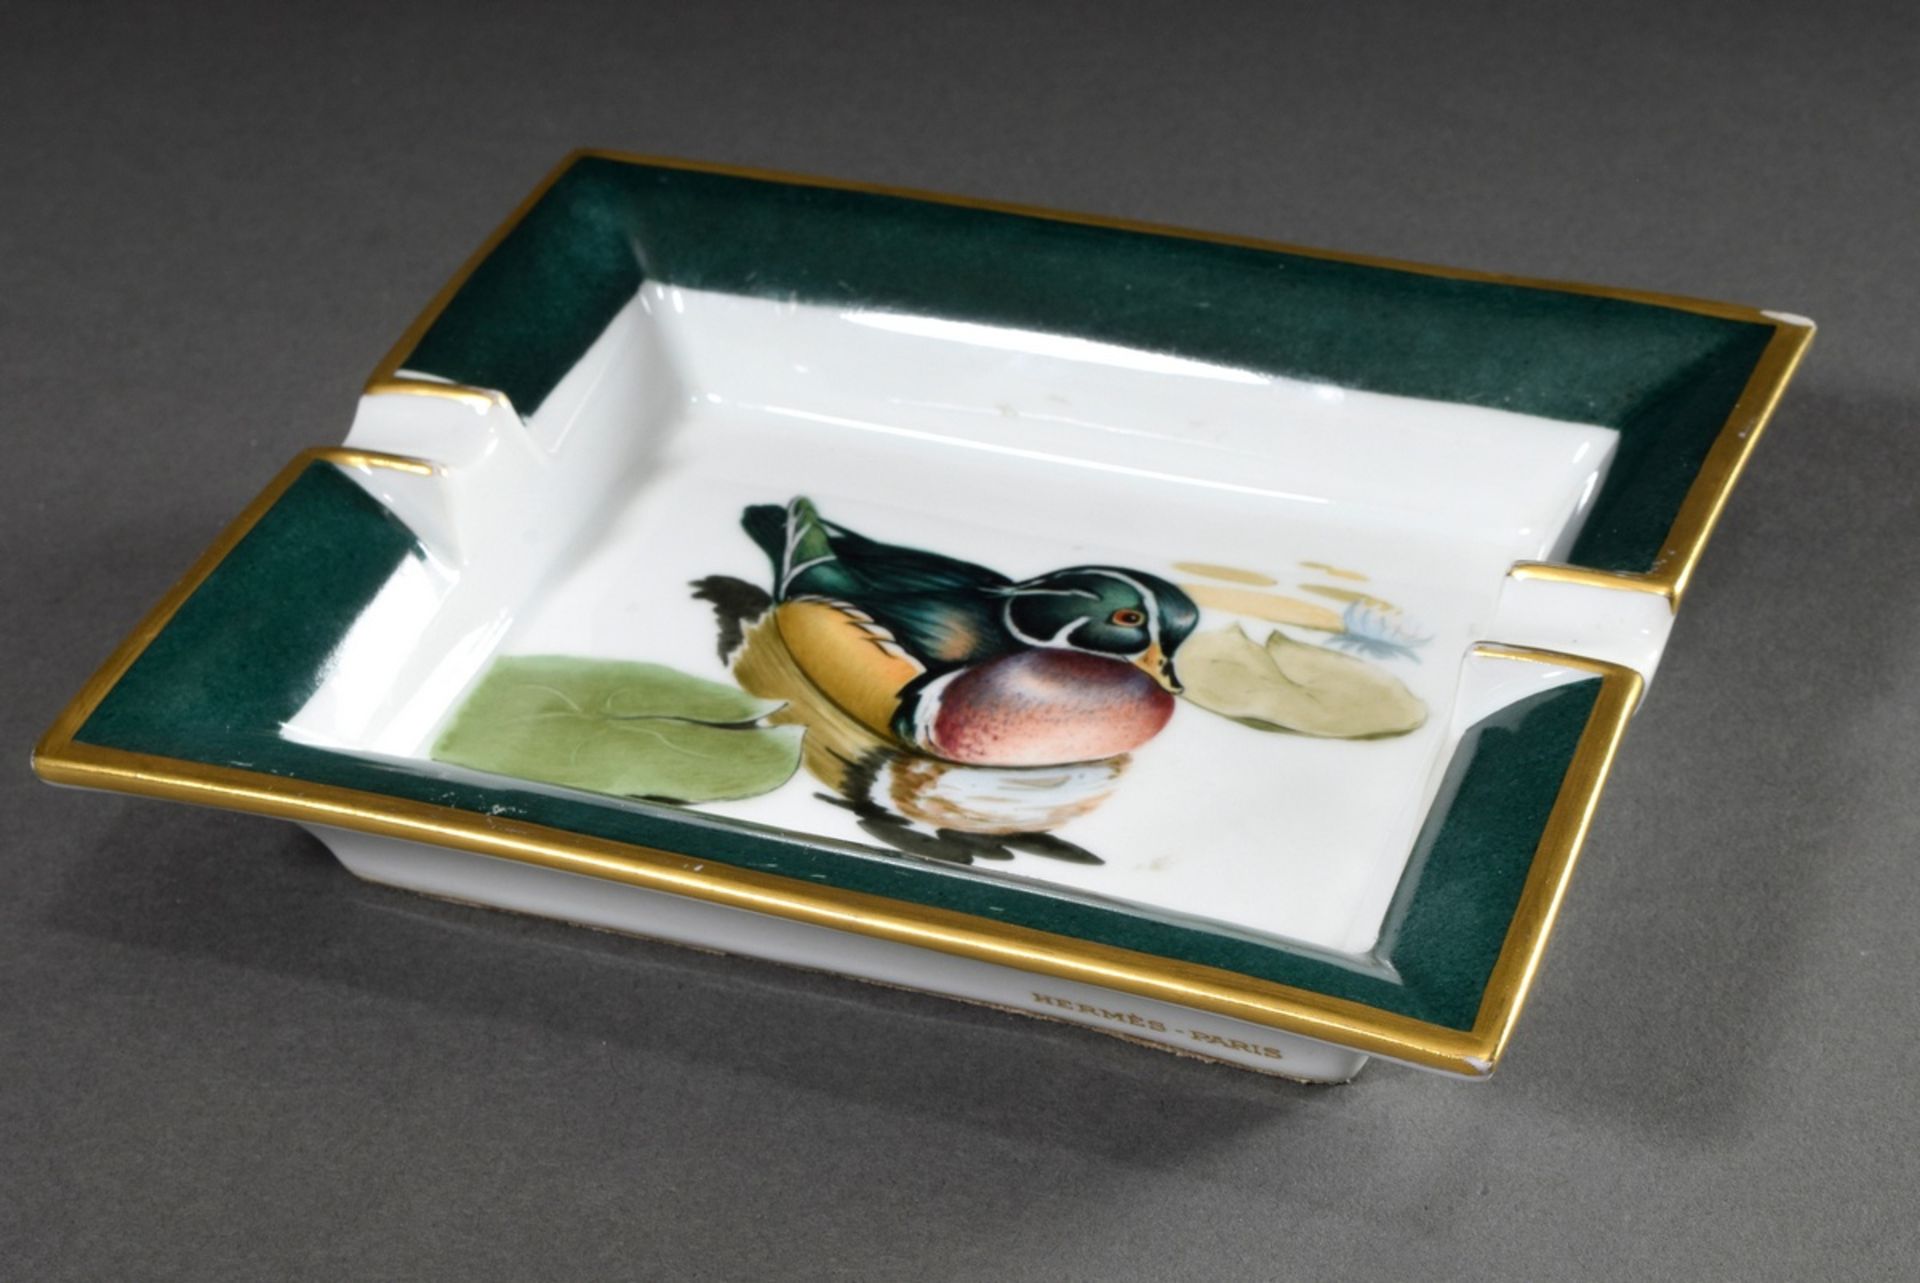 Hermès porcelain ashtray "Brautente", colourfully painted in green/gold, sign. Rybal, 19x18cm, rubb - Image 2 of 5